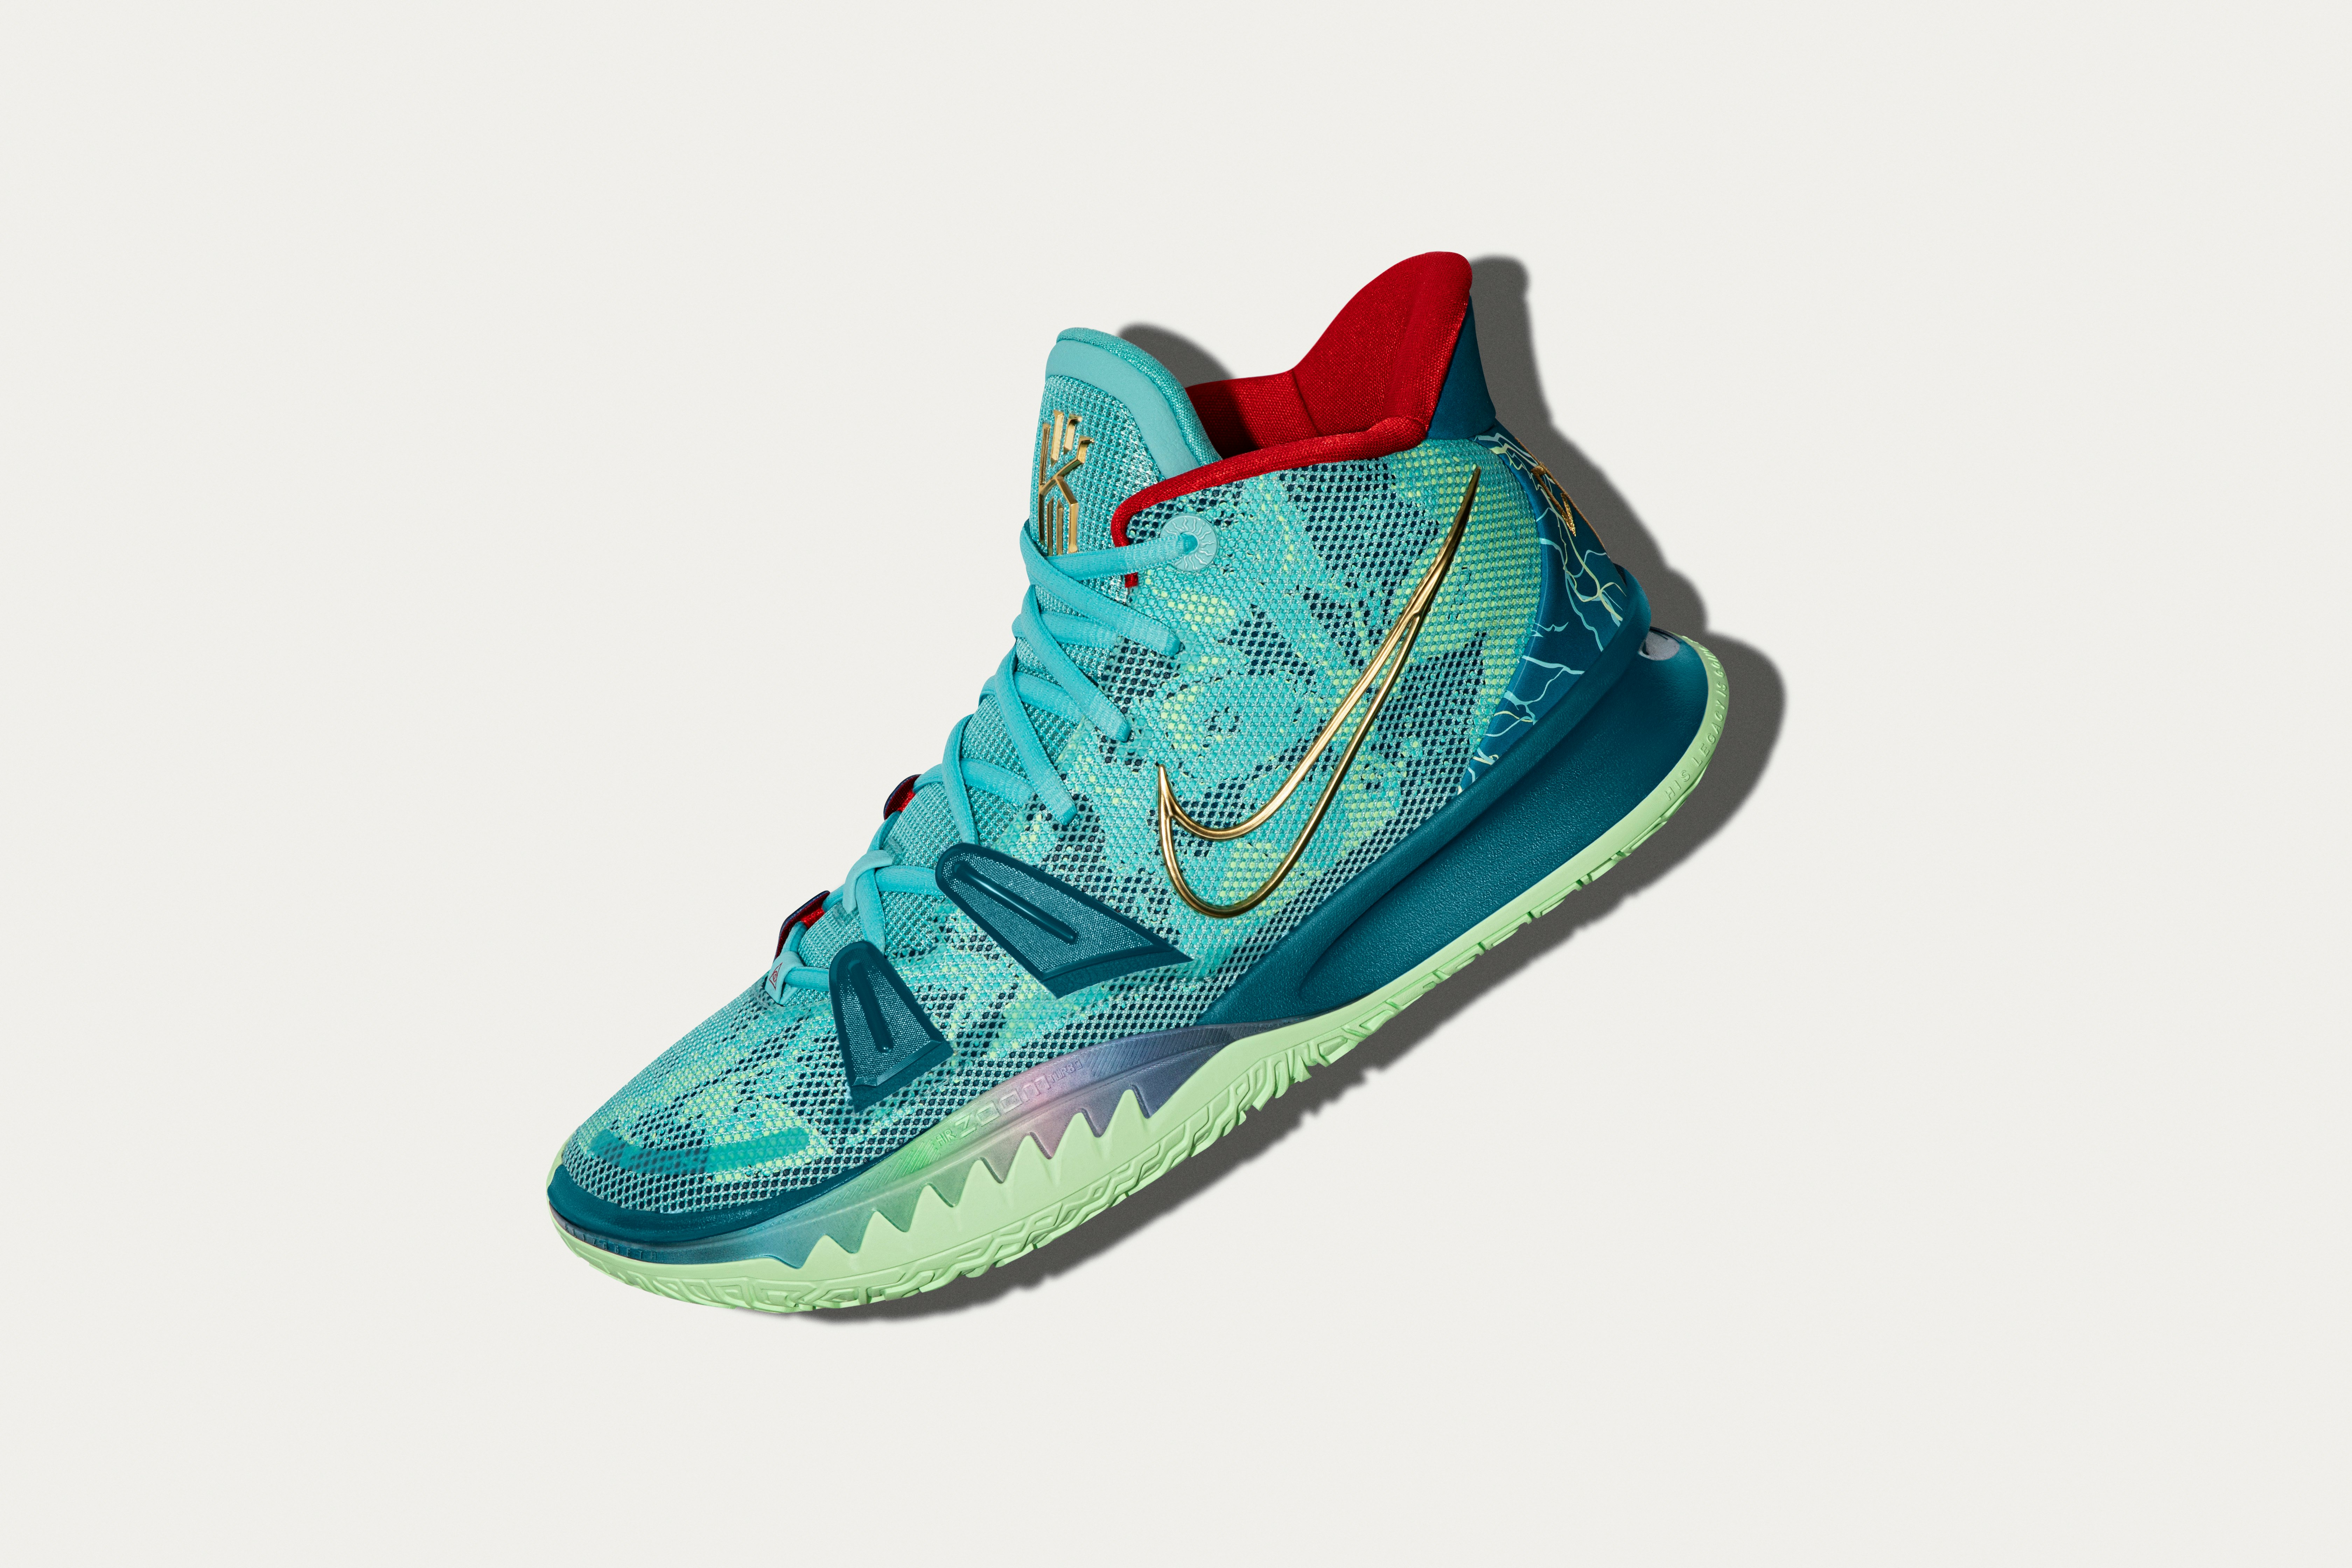 Nike's Kyrie 7 shoe is inspired by 